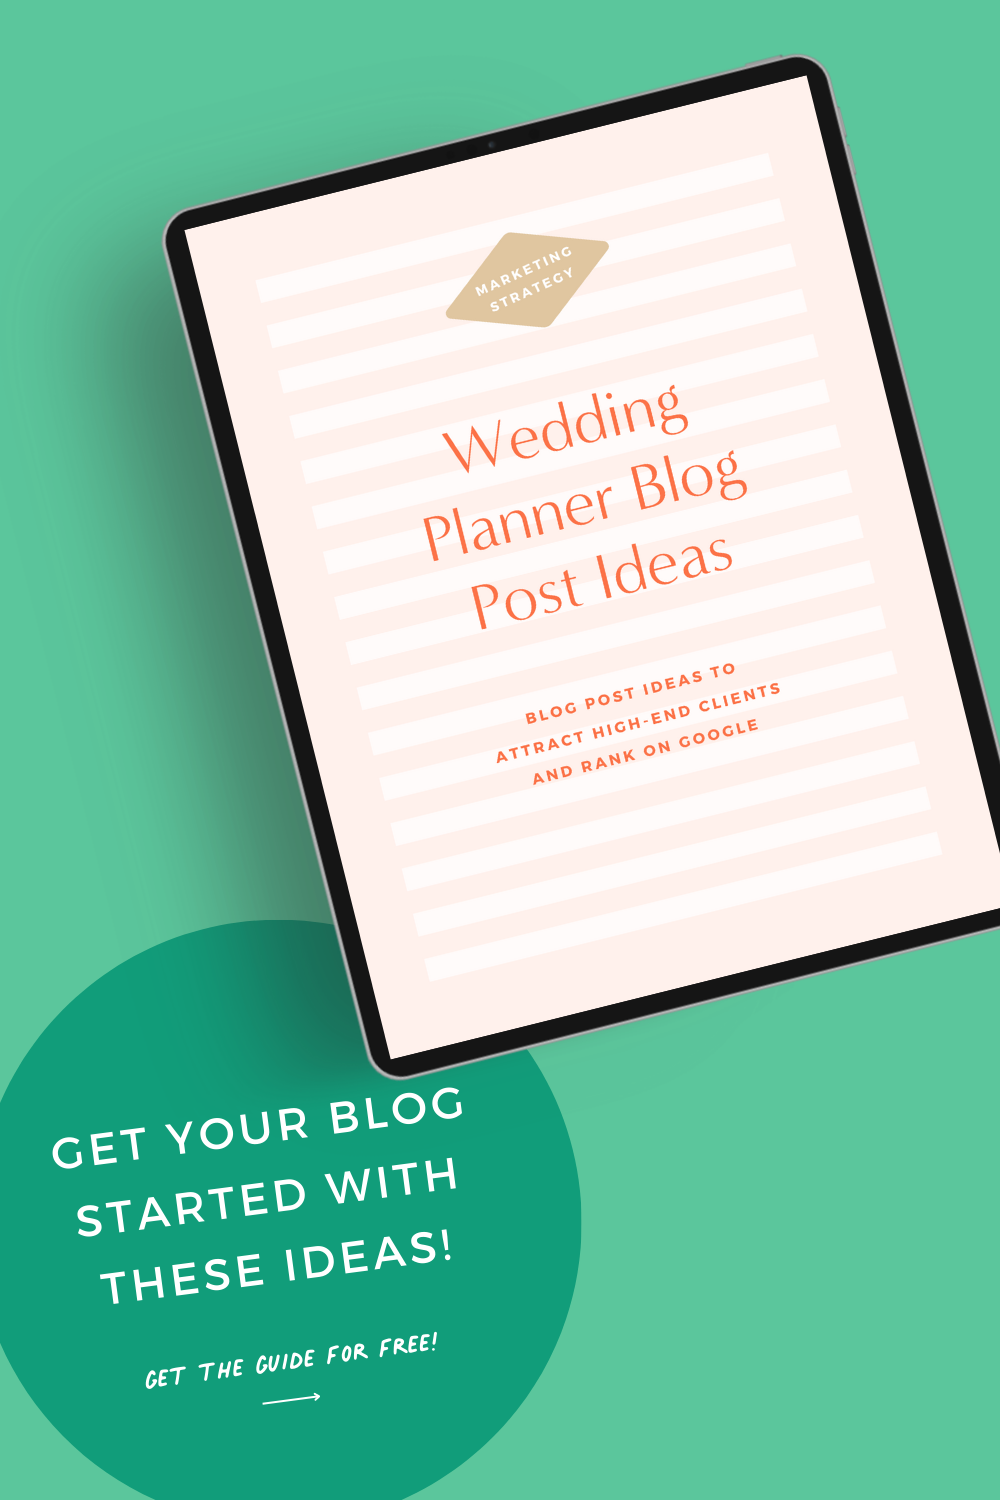 Struggling to come up with ideas for your wedding planning blog? Get our free download with 10 SEO-rich wedding planner blog topics. These compelling topics will not only rank high on Google but also lure your dream clients. Start making an impact with your blog posts today!